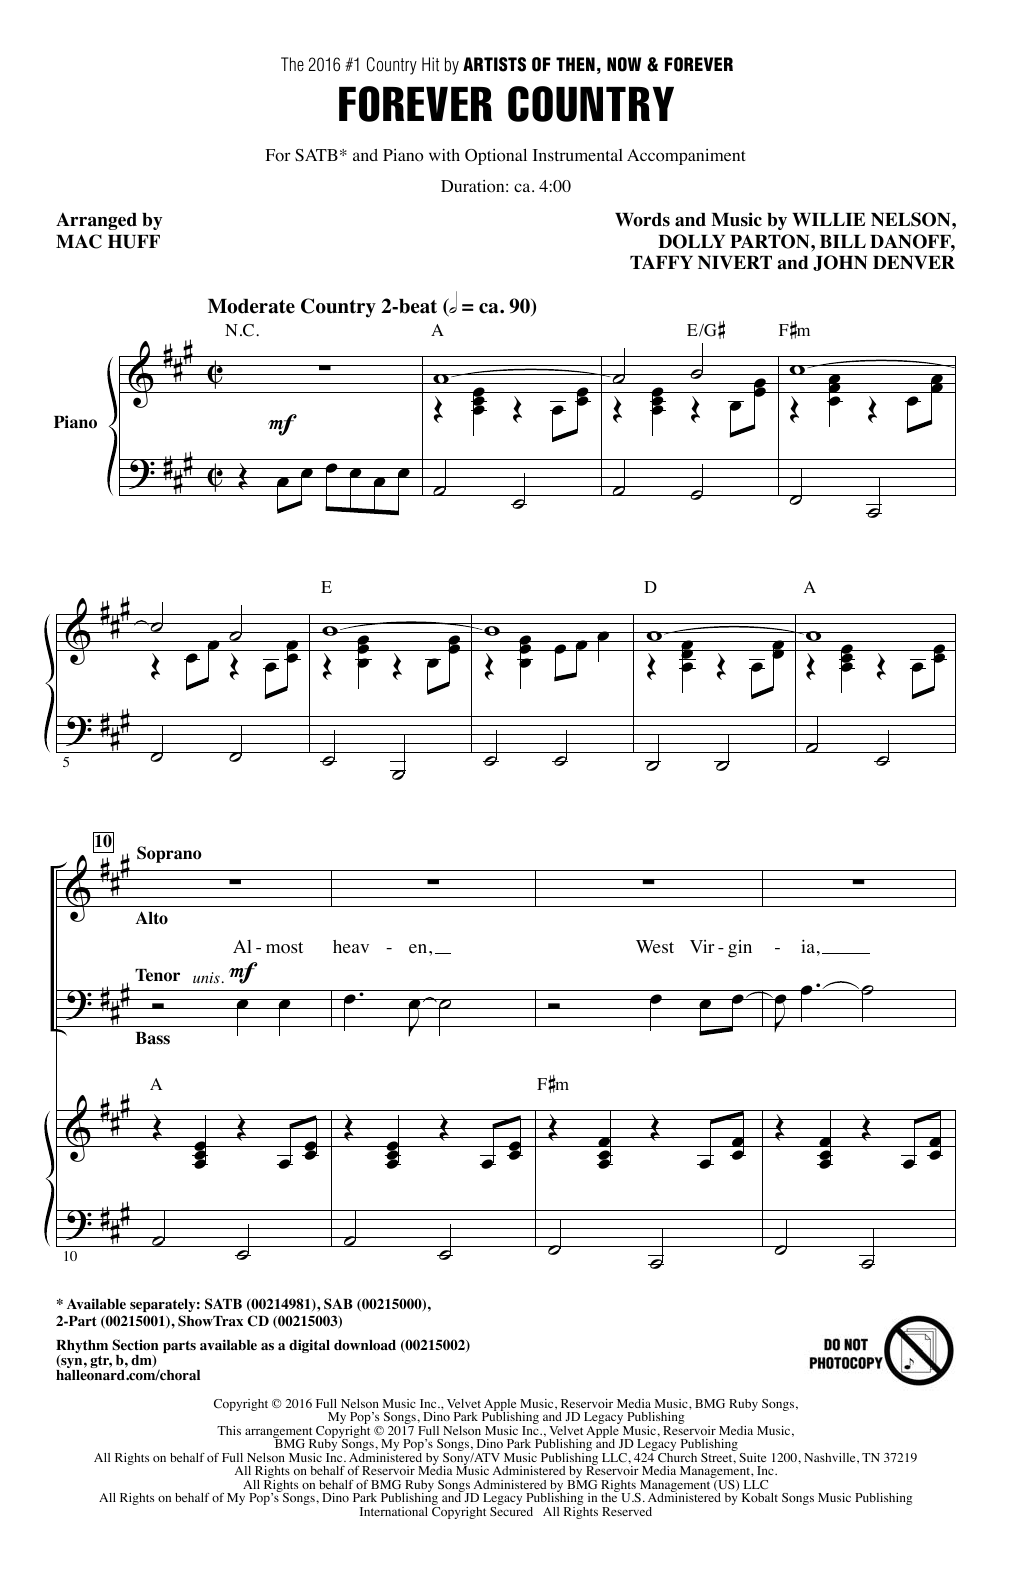 Download Artists of Then, Now & Forever Forever Country (arr. Mac Huff) Sheet Music